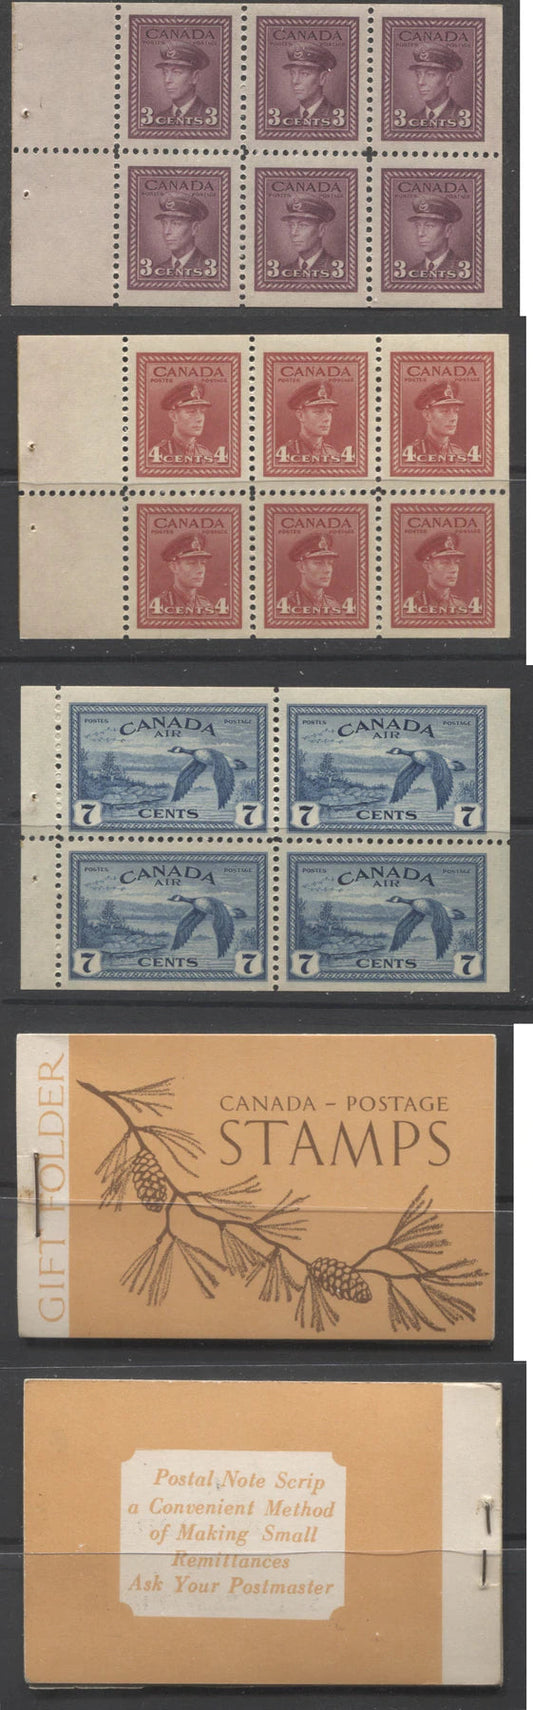 Lot 296 Canada #BK39a (McCann #39b) 1942-1949 War Issue Complete $1.00 English, Booklet Containing 1 Pane Each of 6 of 3c and 4c Plus 2 Panes of 4 7c  Airmail Stamps, 14 mm Staple